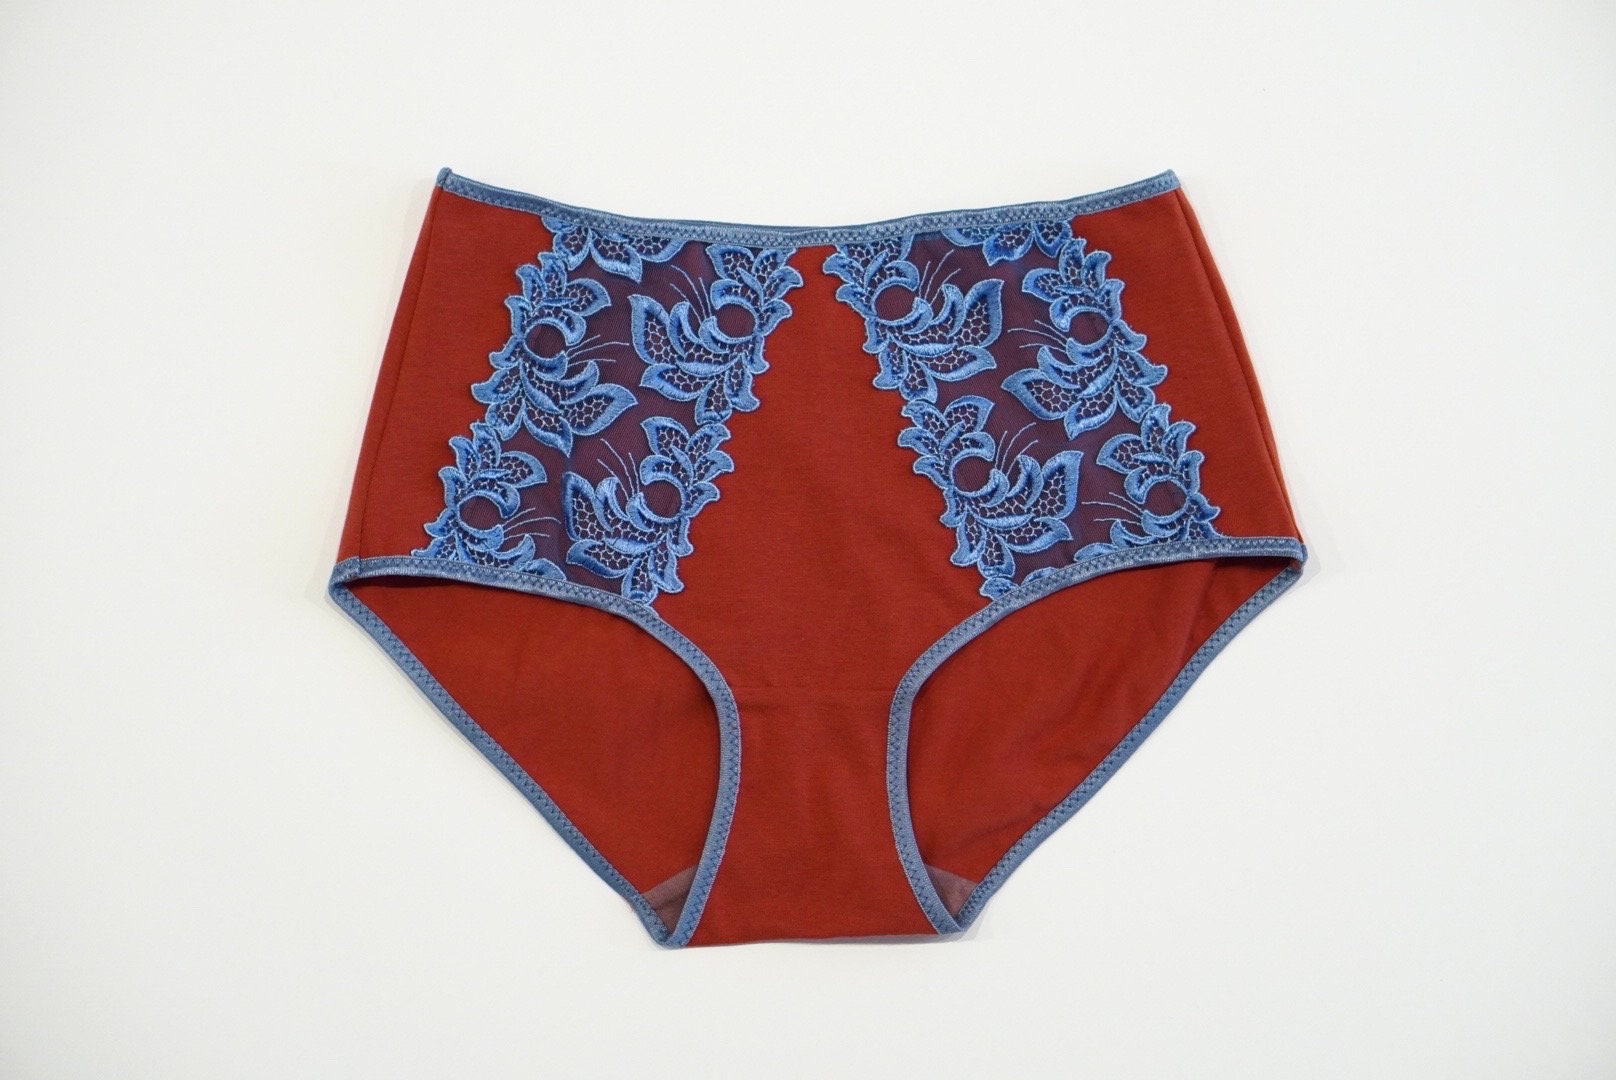 Thong Undies in Rust by Lotus Tribe Clothing. Women's G String